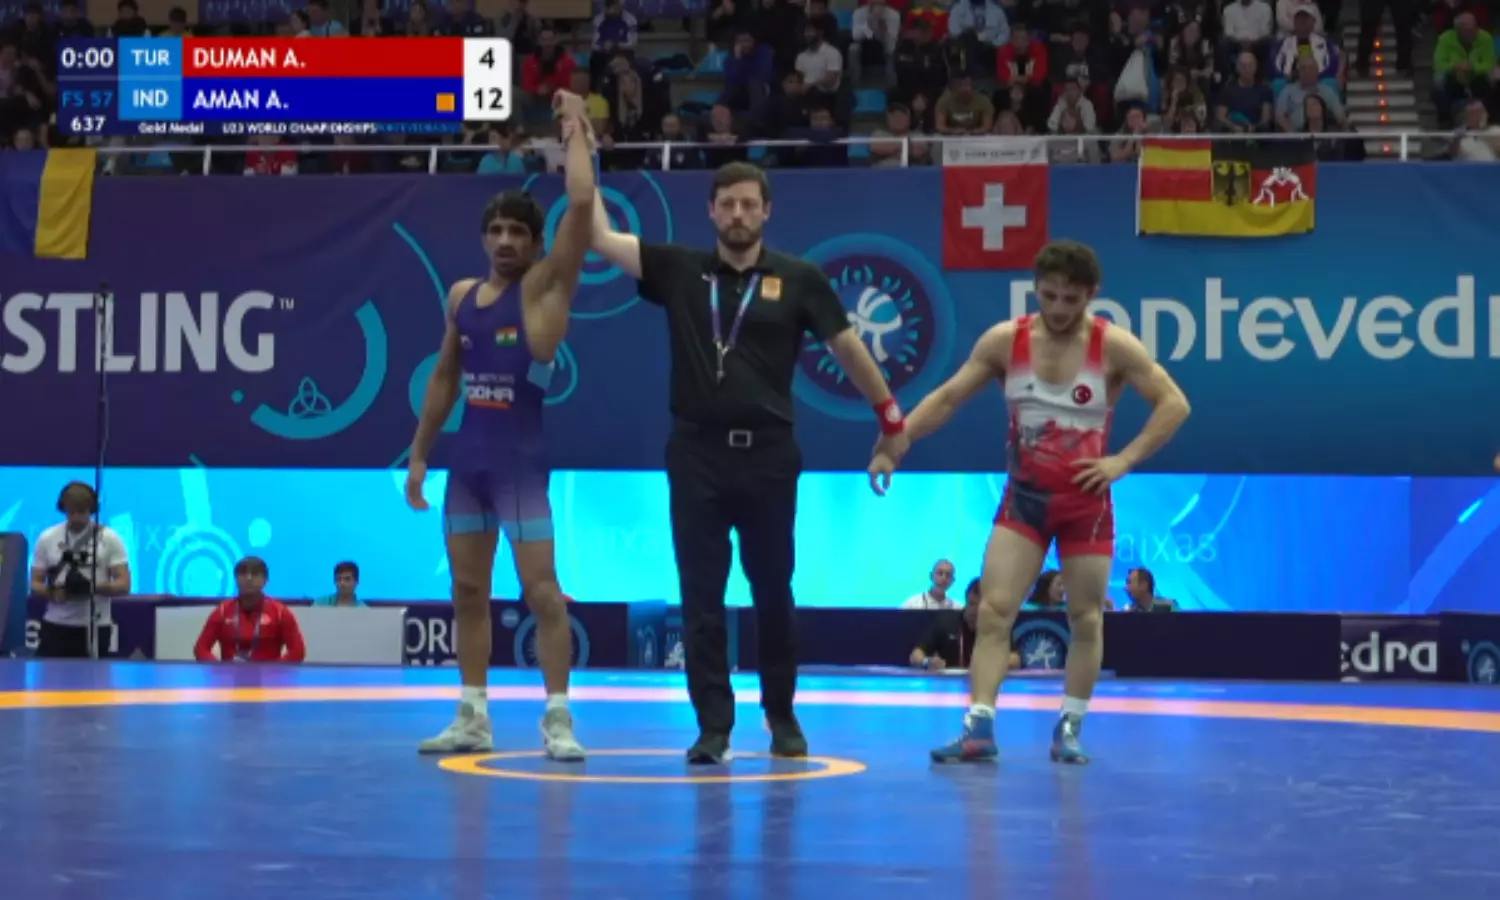 Aman Sehrawat wins India's first gold at U-23 World Wrestling Championships 